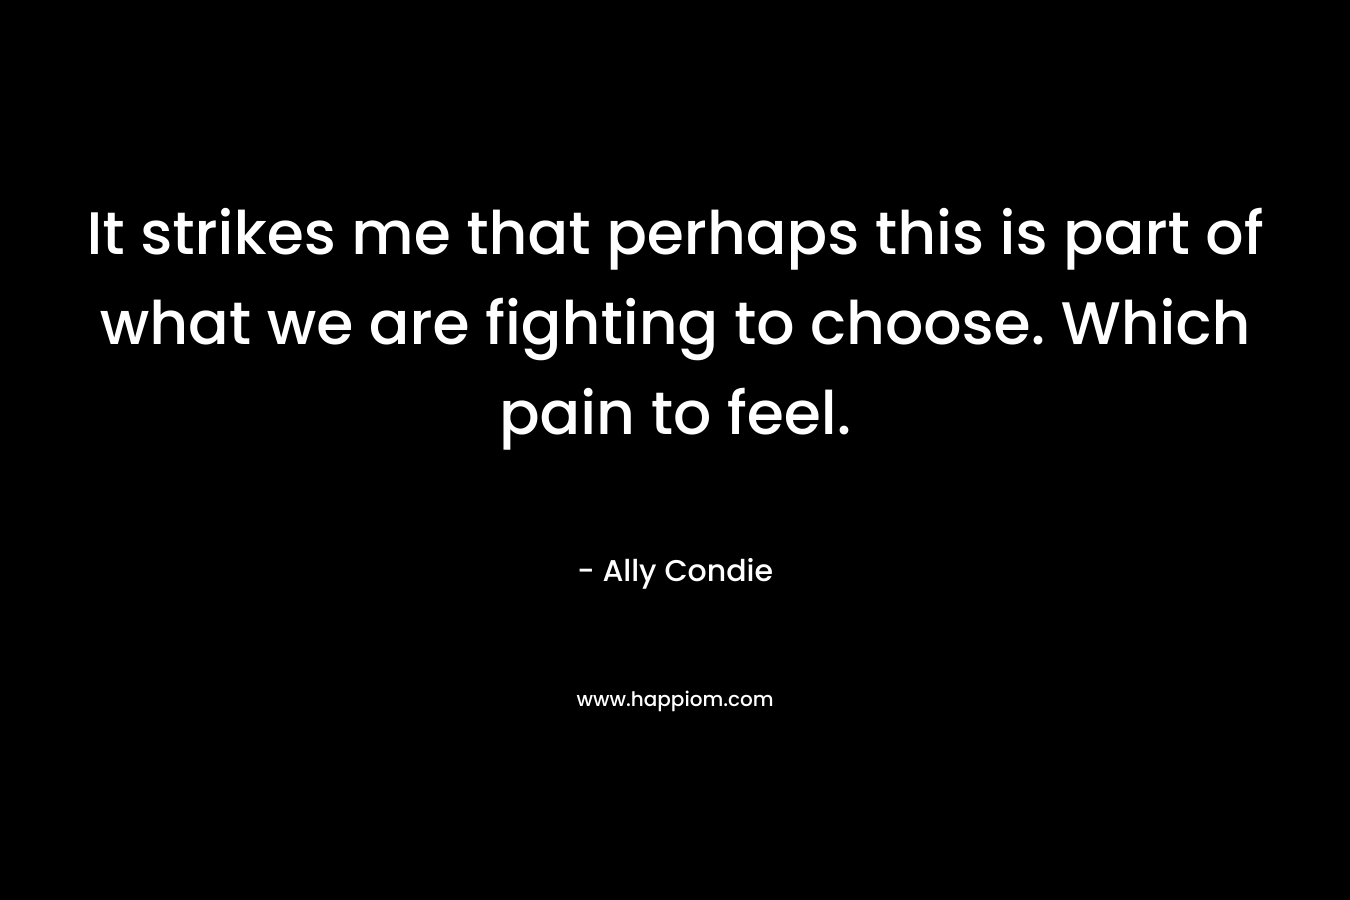 It strikes me that perhaps this is part of what we are fighting to choose. Which pain to feel. – Ally Condie